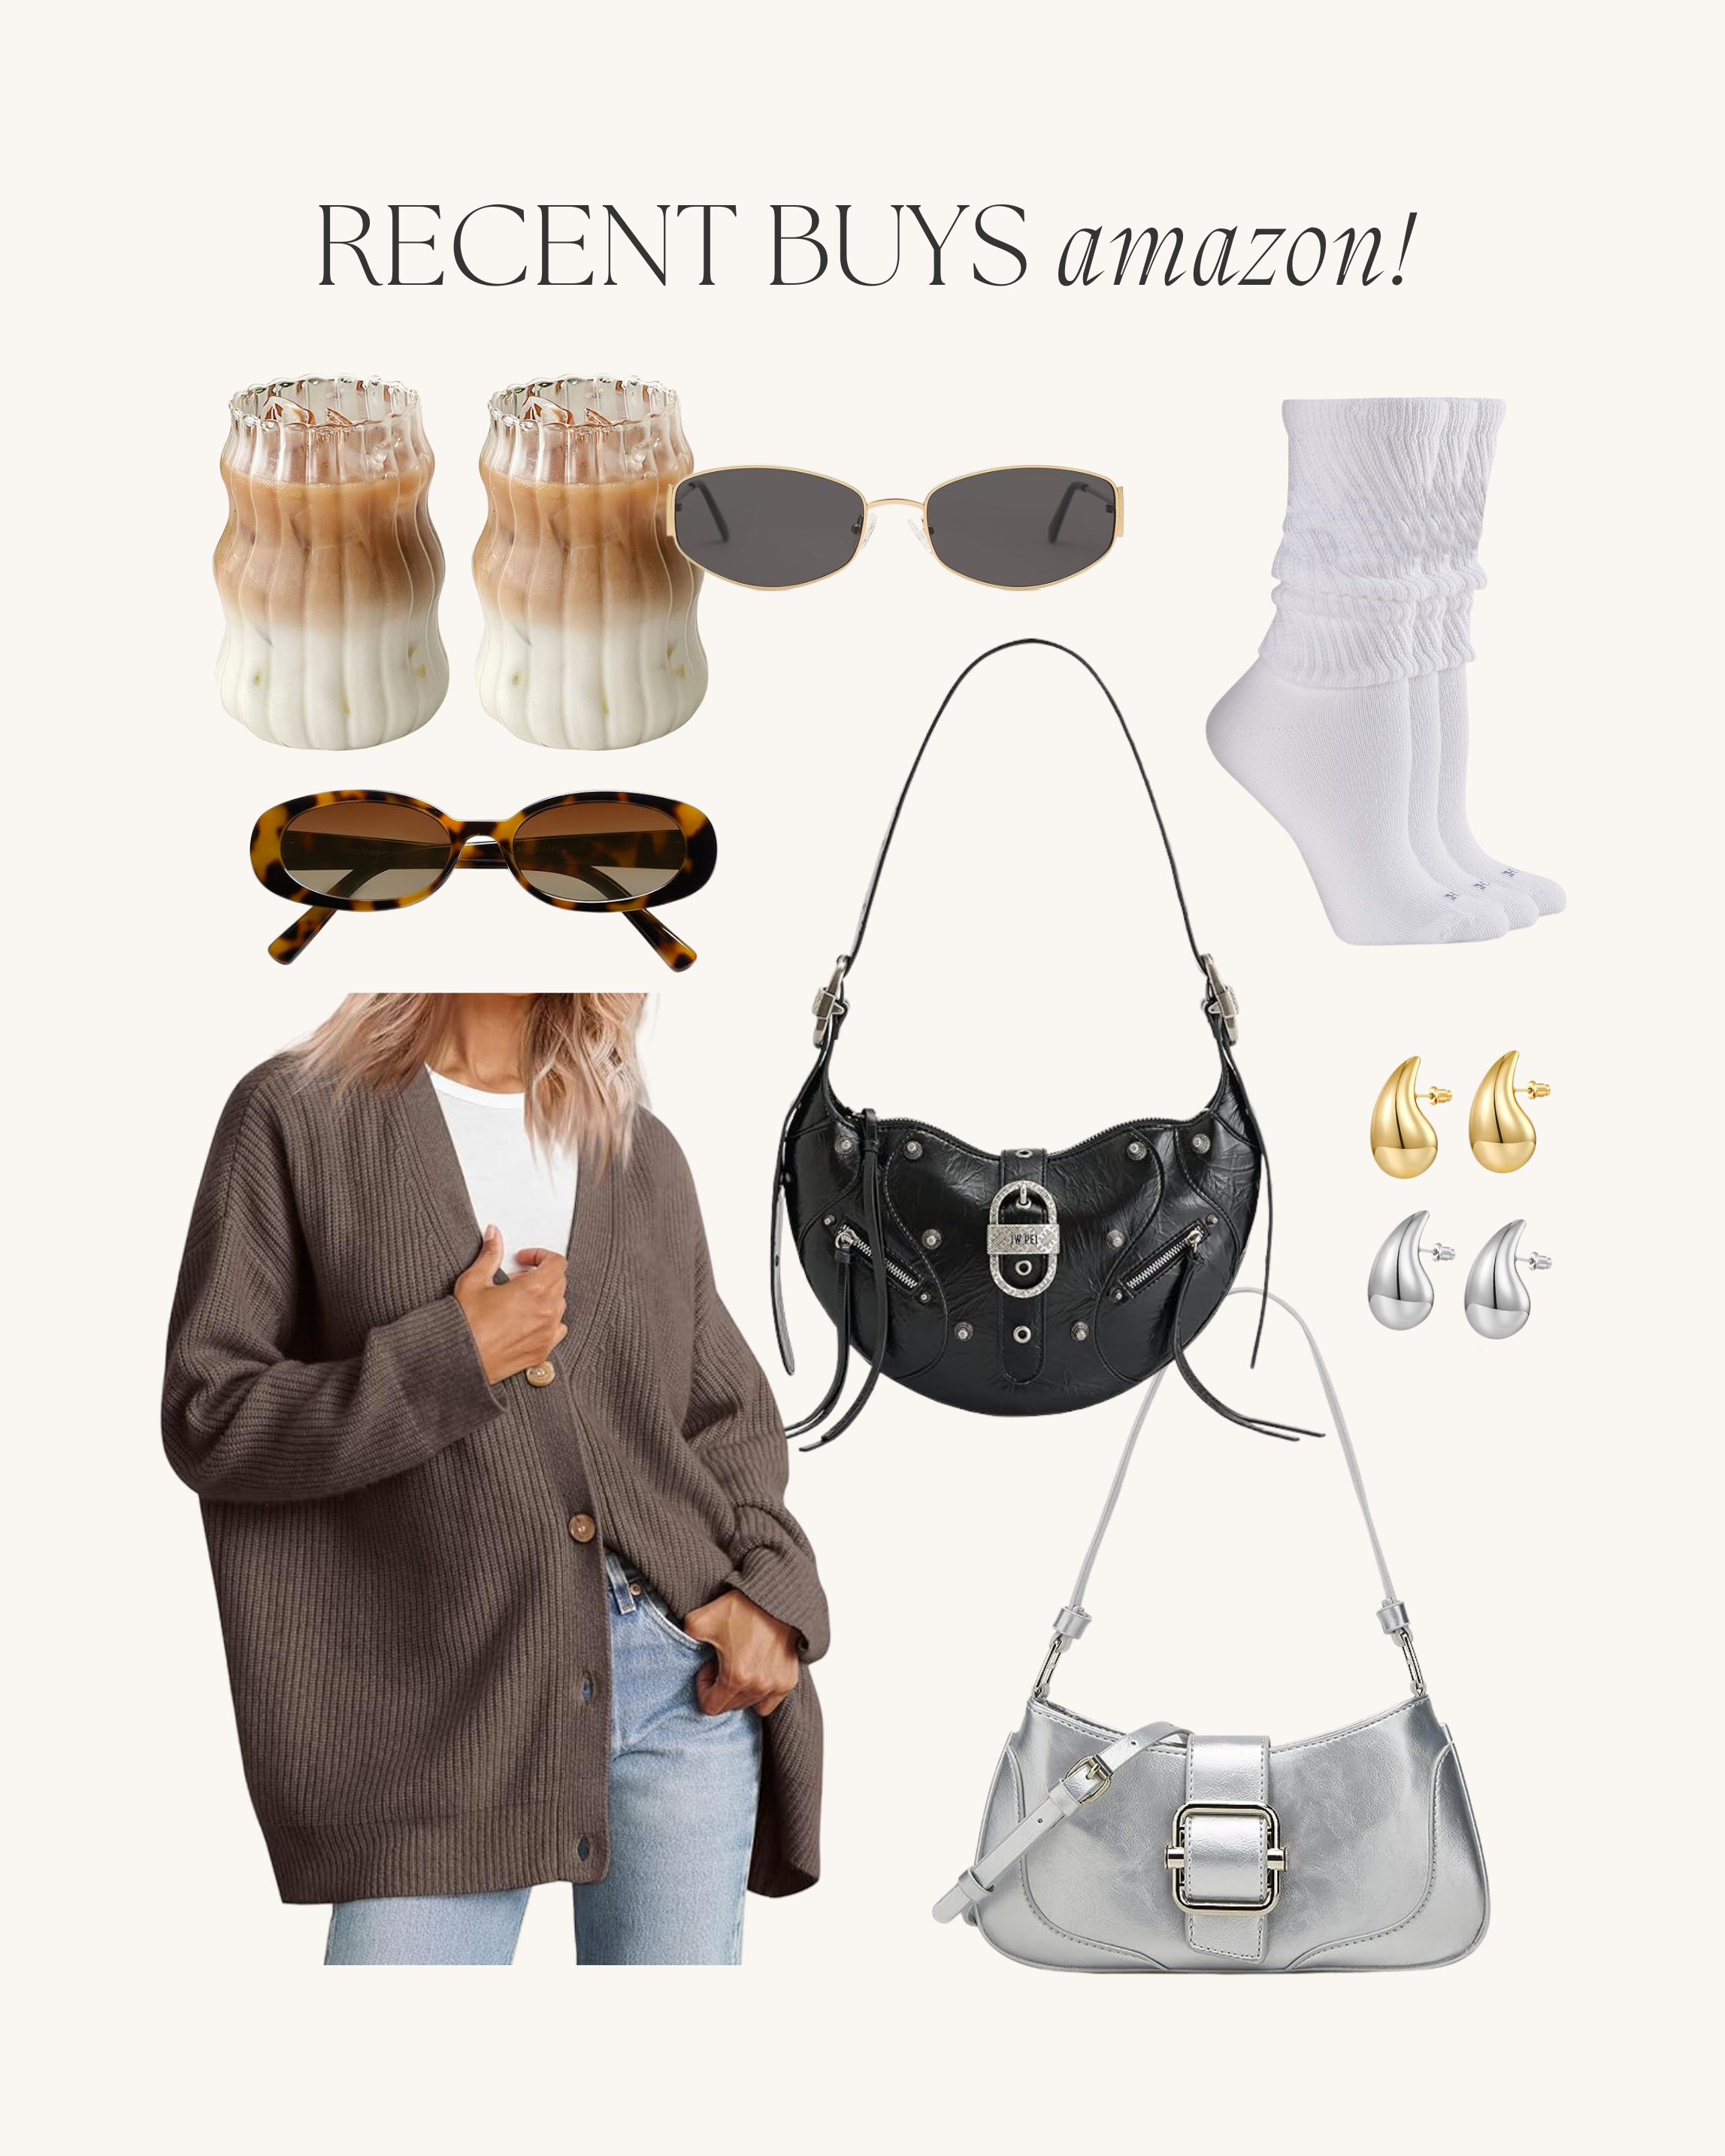 Recent Amazon Buys - Fashion, Earrings, Sunglasses, Slouch Socks, Purse, Under $100 - bresheppard.com.png